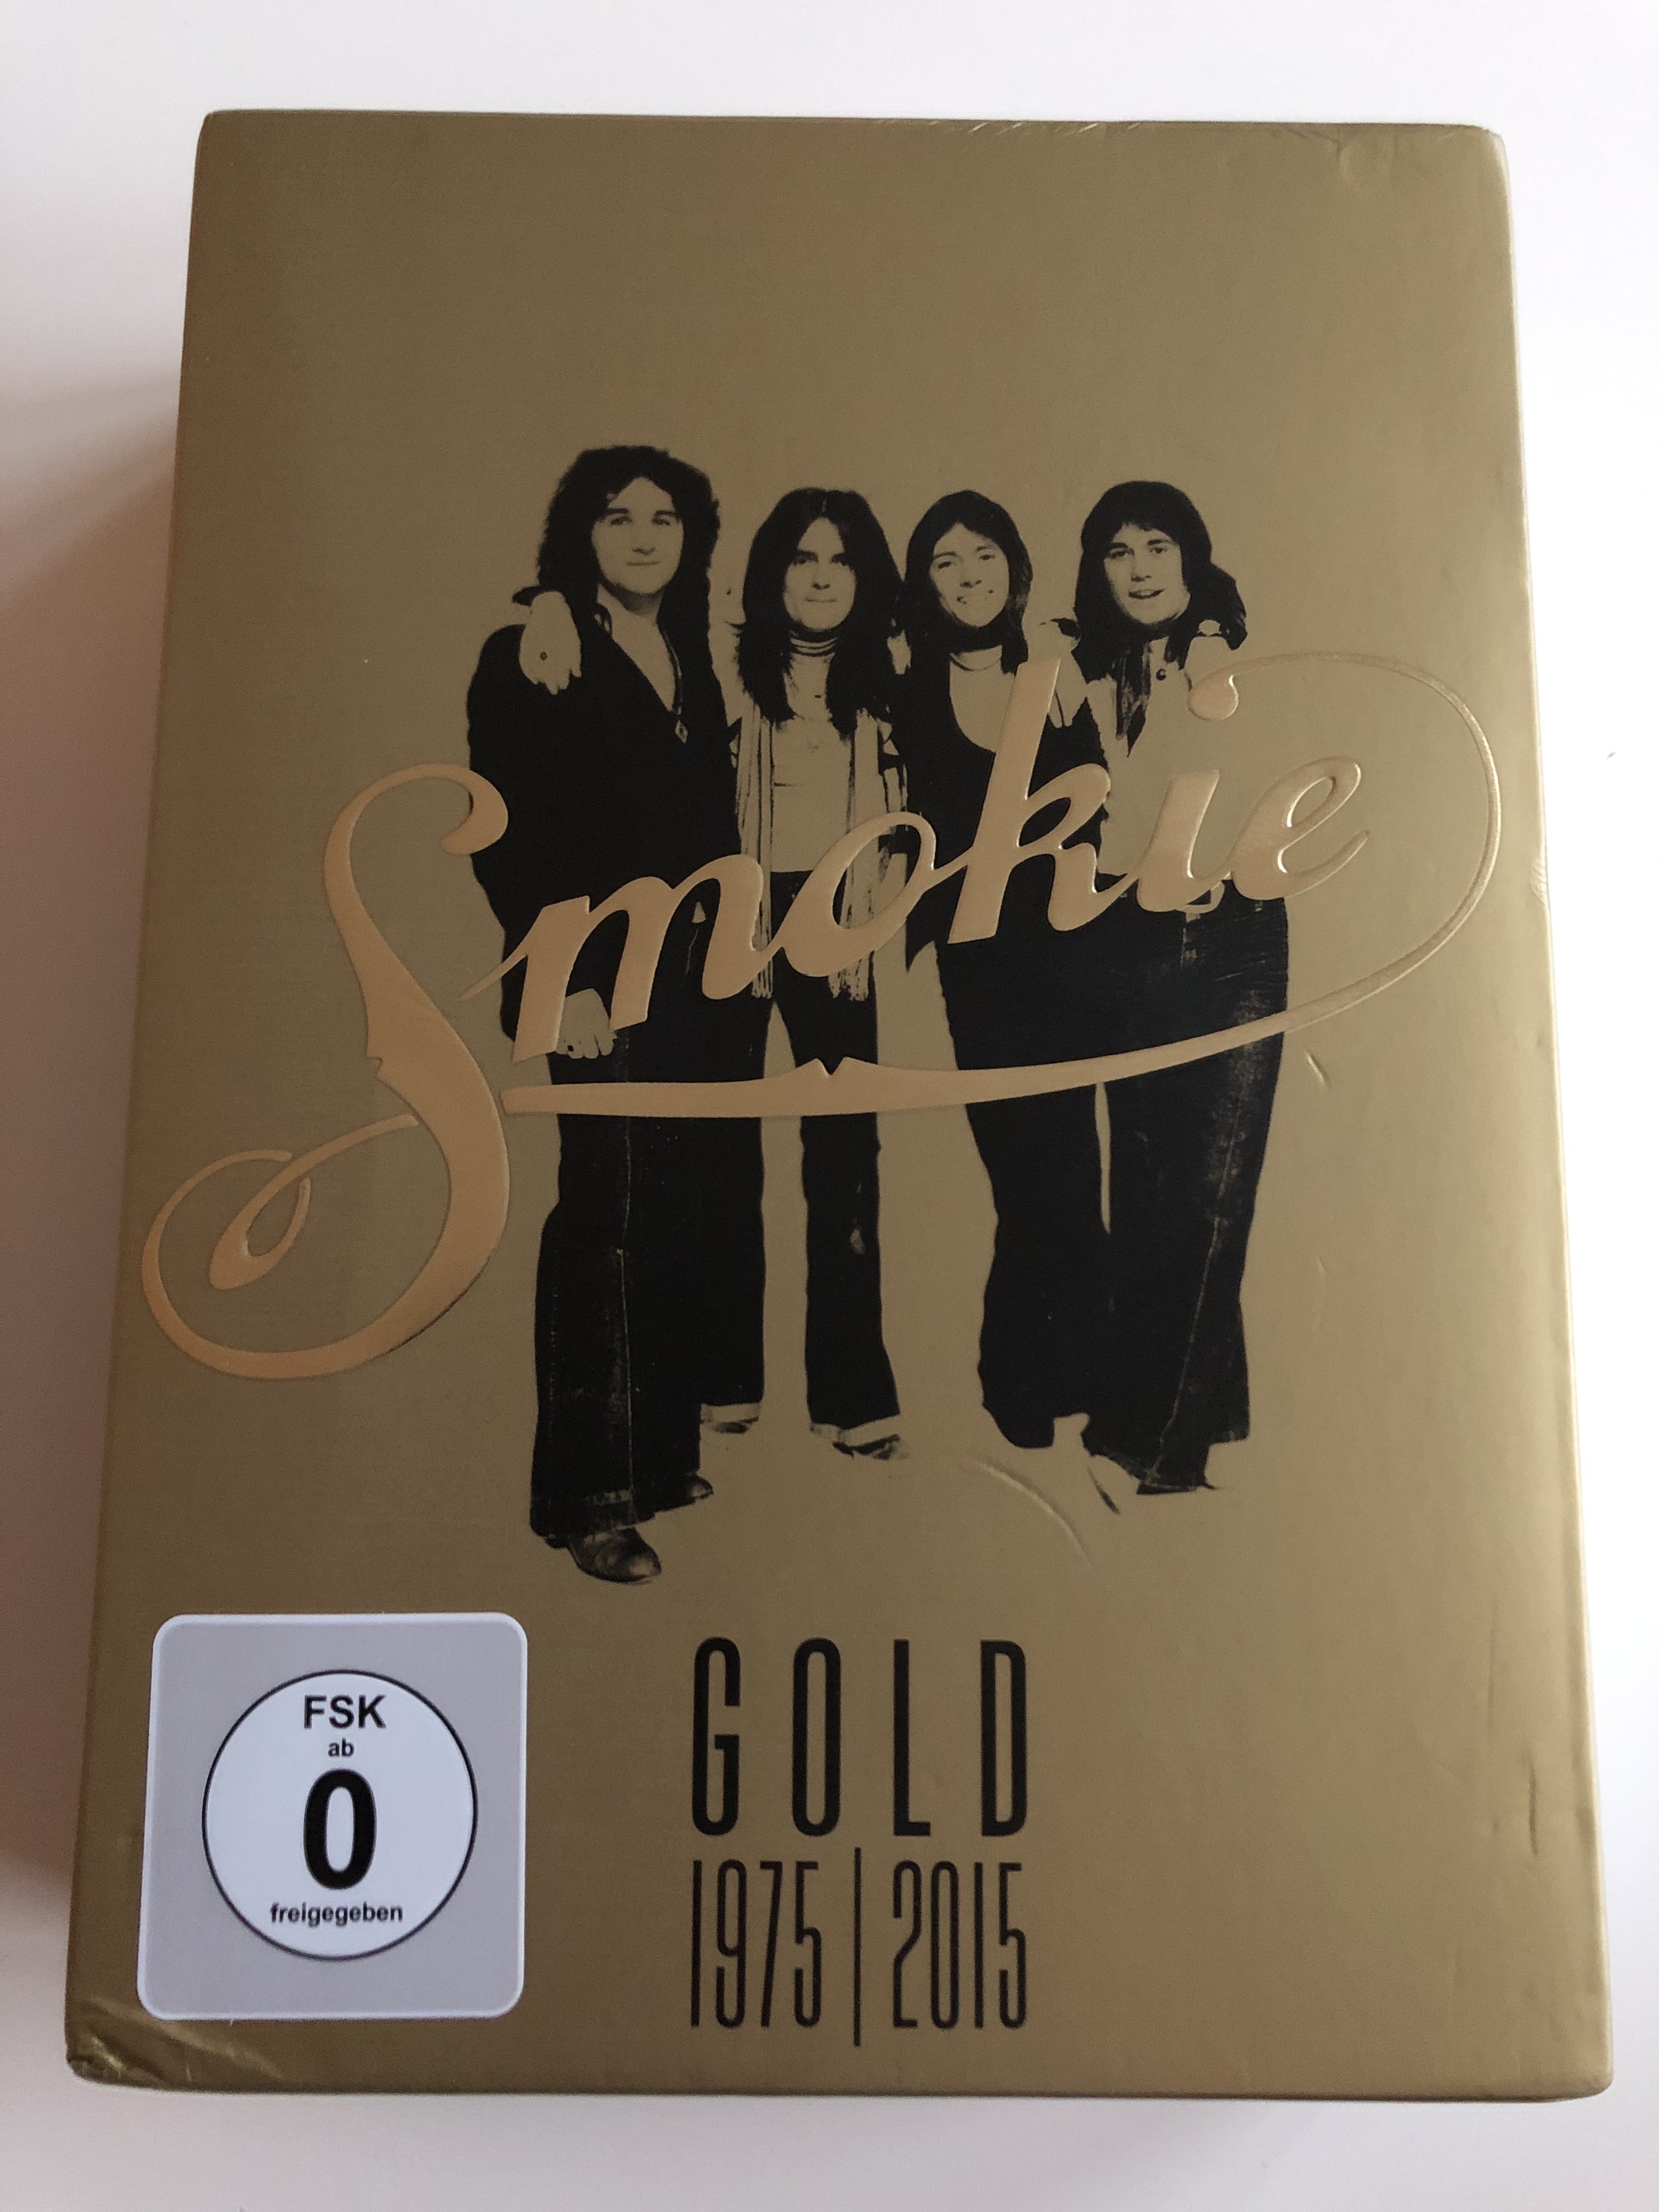 smokie-gold-1975-2015-dvd-40th-anniversary-edition-the-definitive-smokie-anthology-all-the-greatest-hits-tv-appearances-from-around-the-world-documentaries-and-interviews-extensive-bonus-features-sony-music-3-dvd-1-.jpg